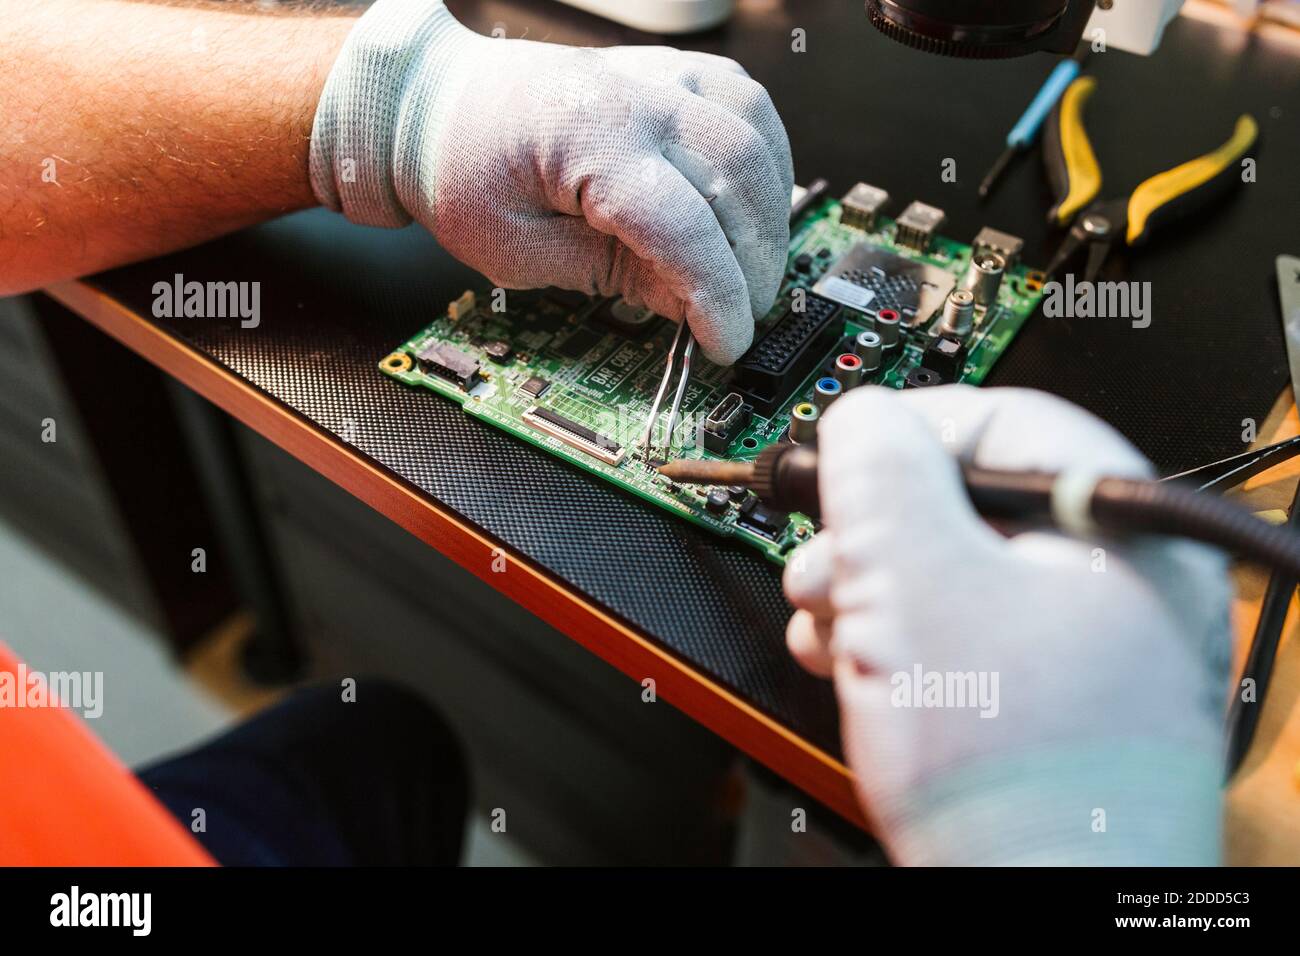 Technician soldering circuit board of electrical component at workbench in electronics repair shop Stock Photo